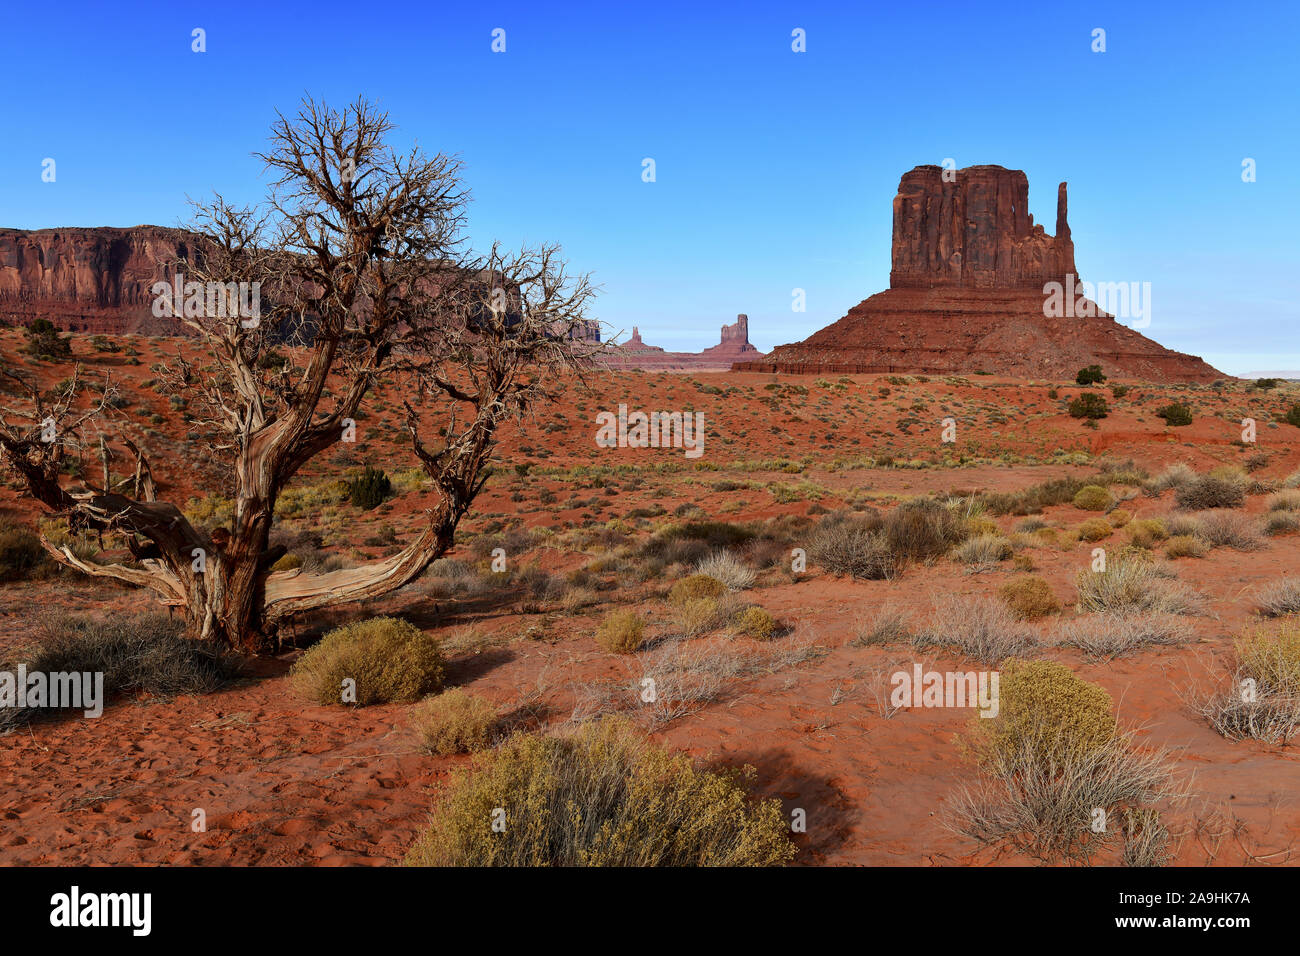 The desert landscape of Monument Valley, Navajo Tribal Park in the southwest USA in Arizona and Utah, America Stock Photo